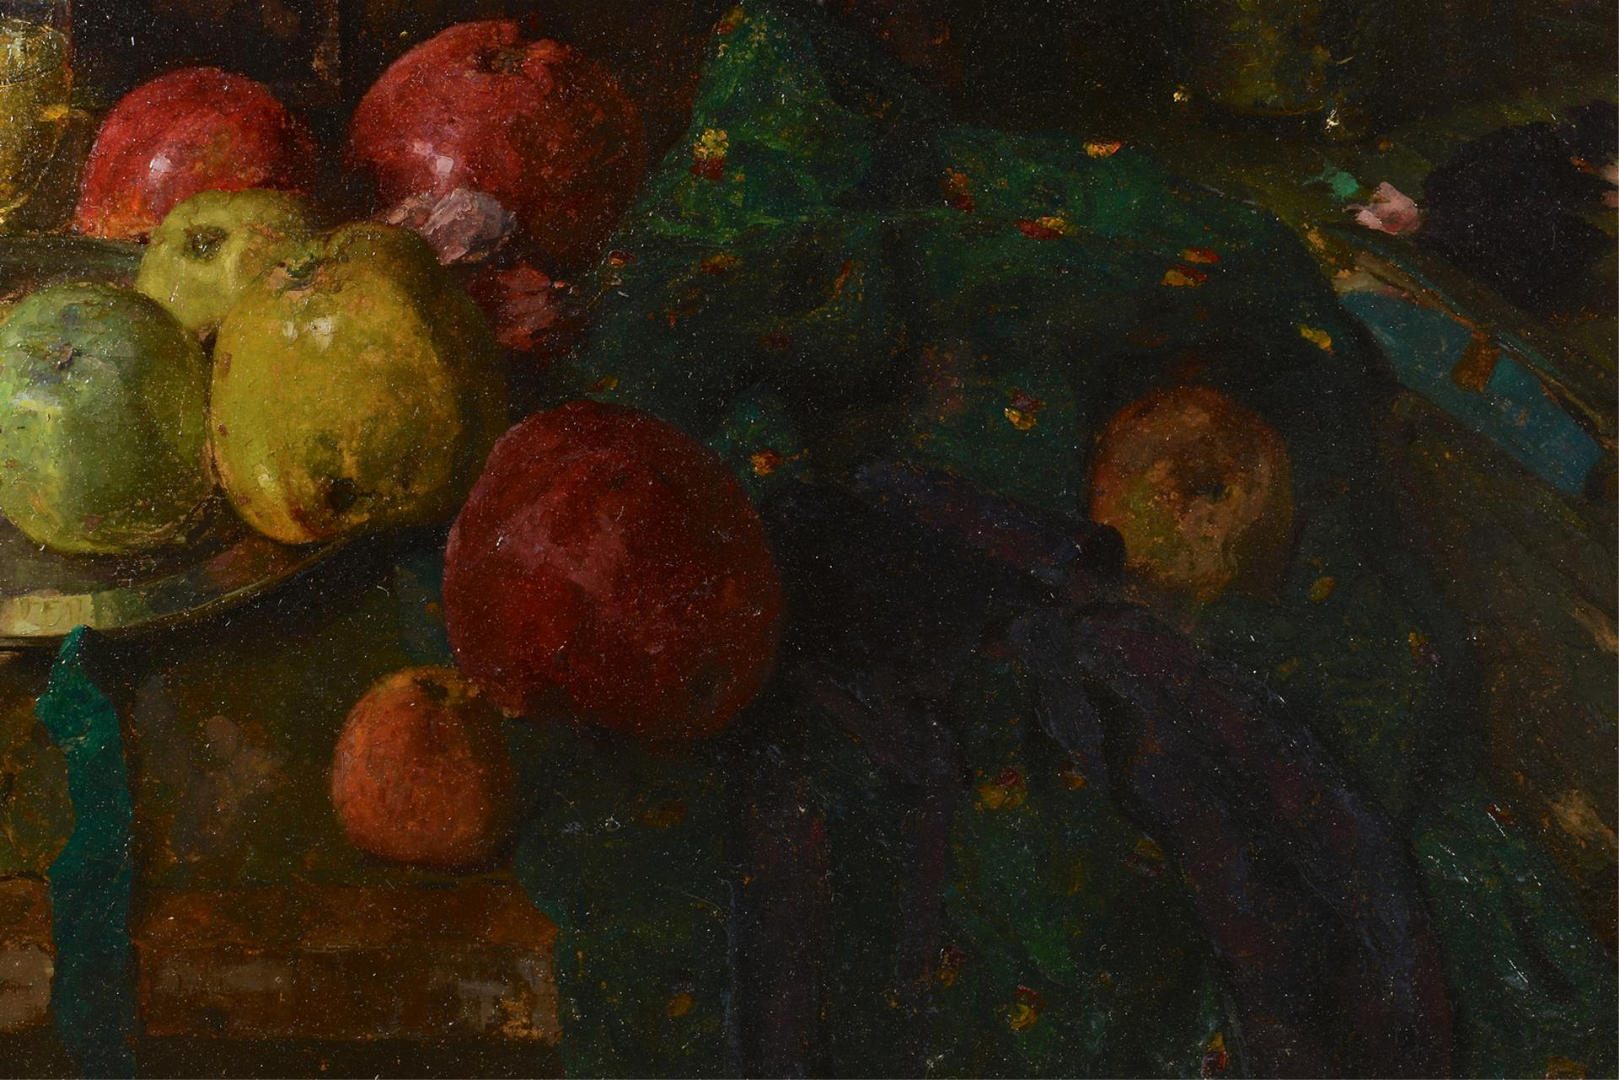 Lot 872: Rene Reinicke, Still Life with Wine and Apples